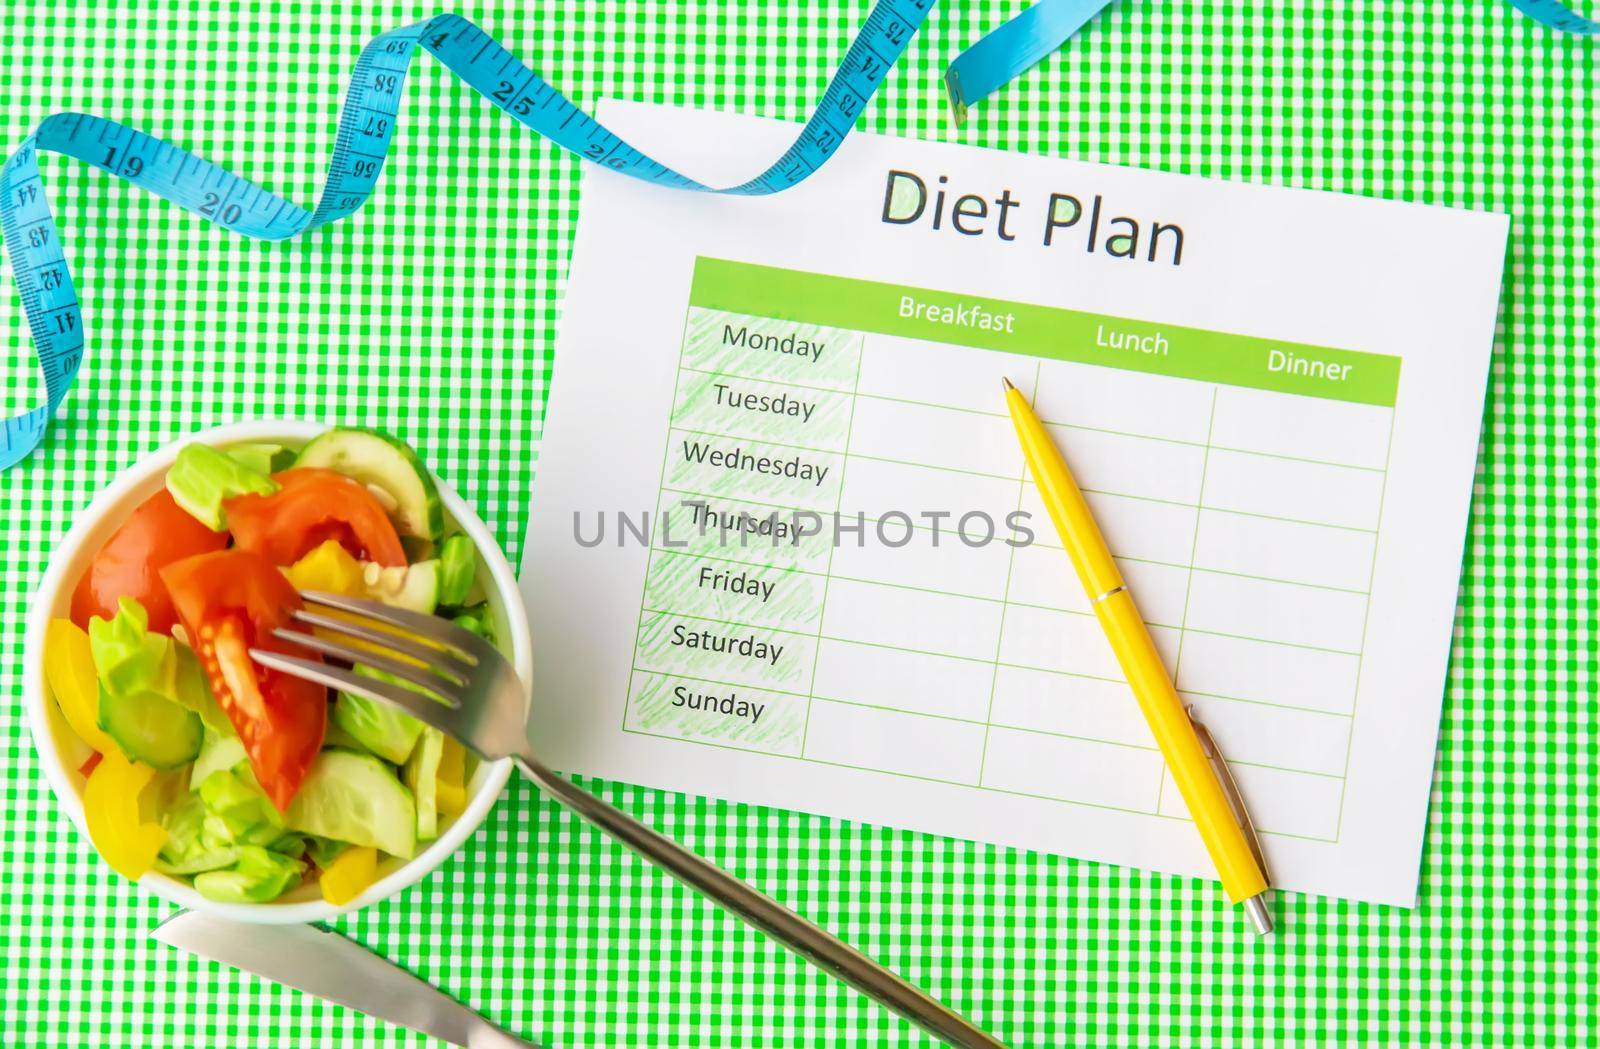 Weekly diet plan. The concept of proper nutrition. Selective focus. nature.